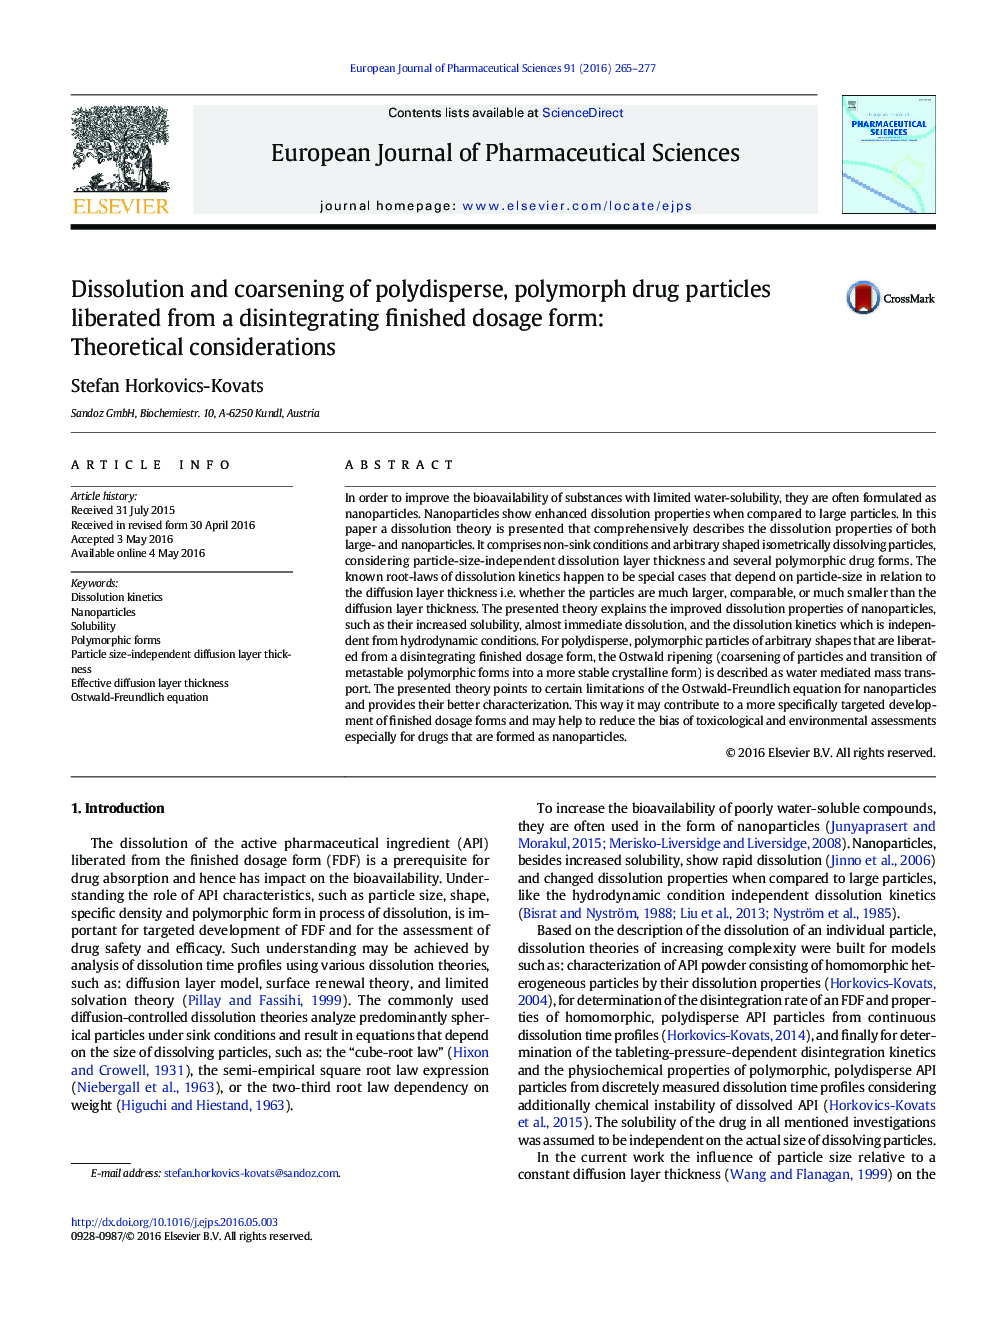 Dissolution and coarsening of polydisperse, polymorph drug particles liberated from a disintegrating finished dosage form: Theoretical considerations